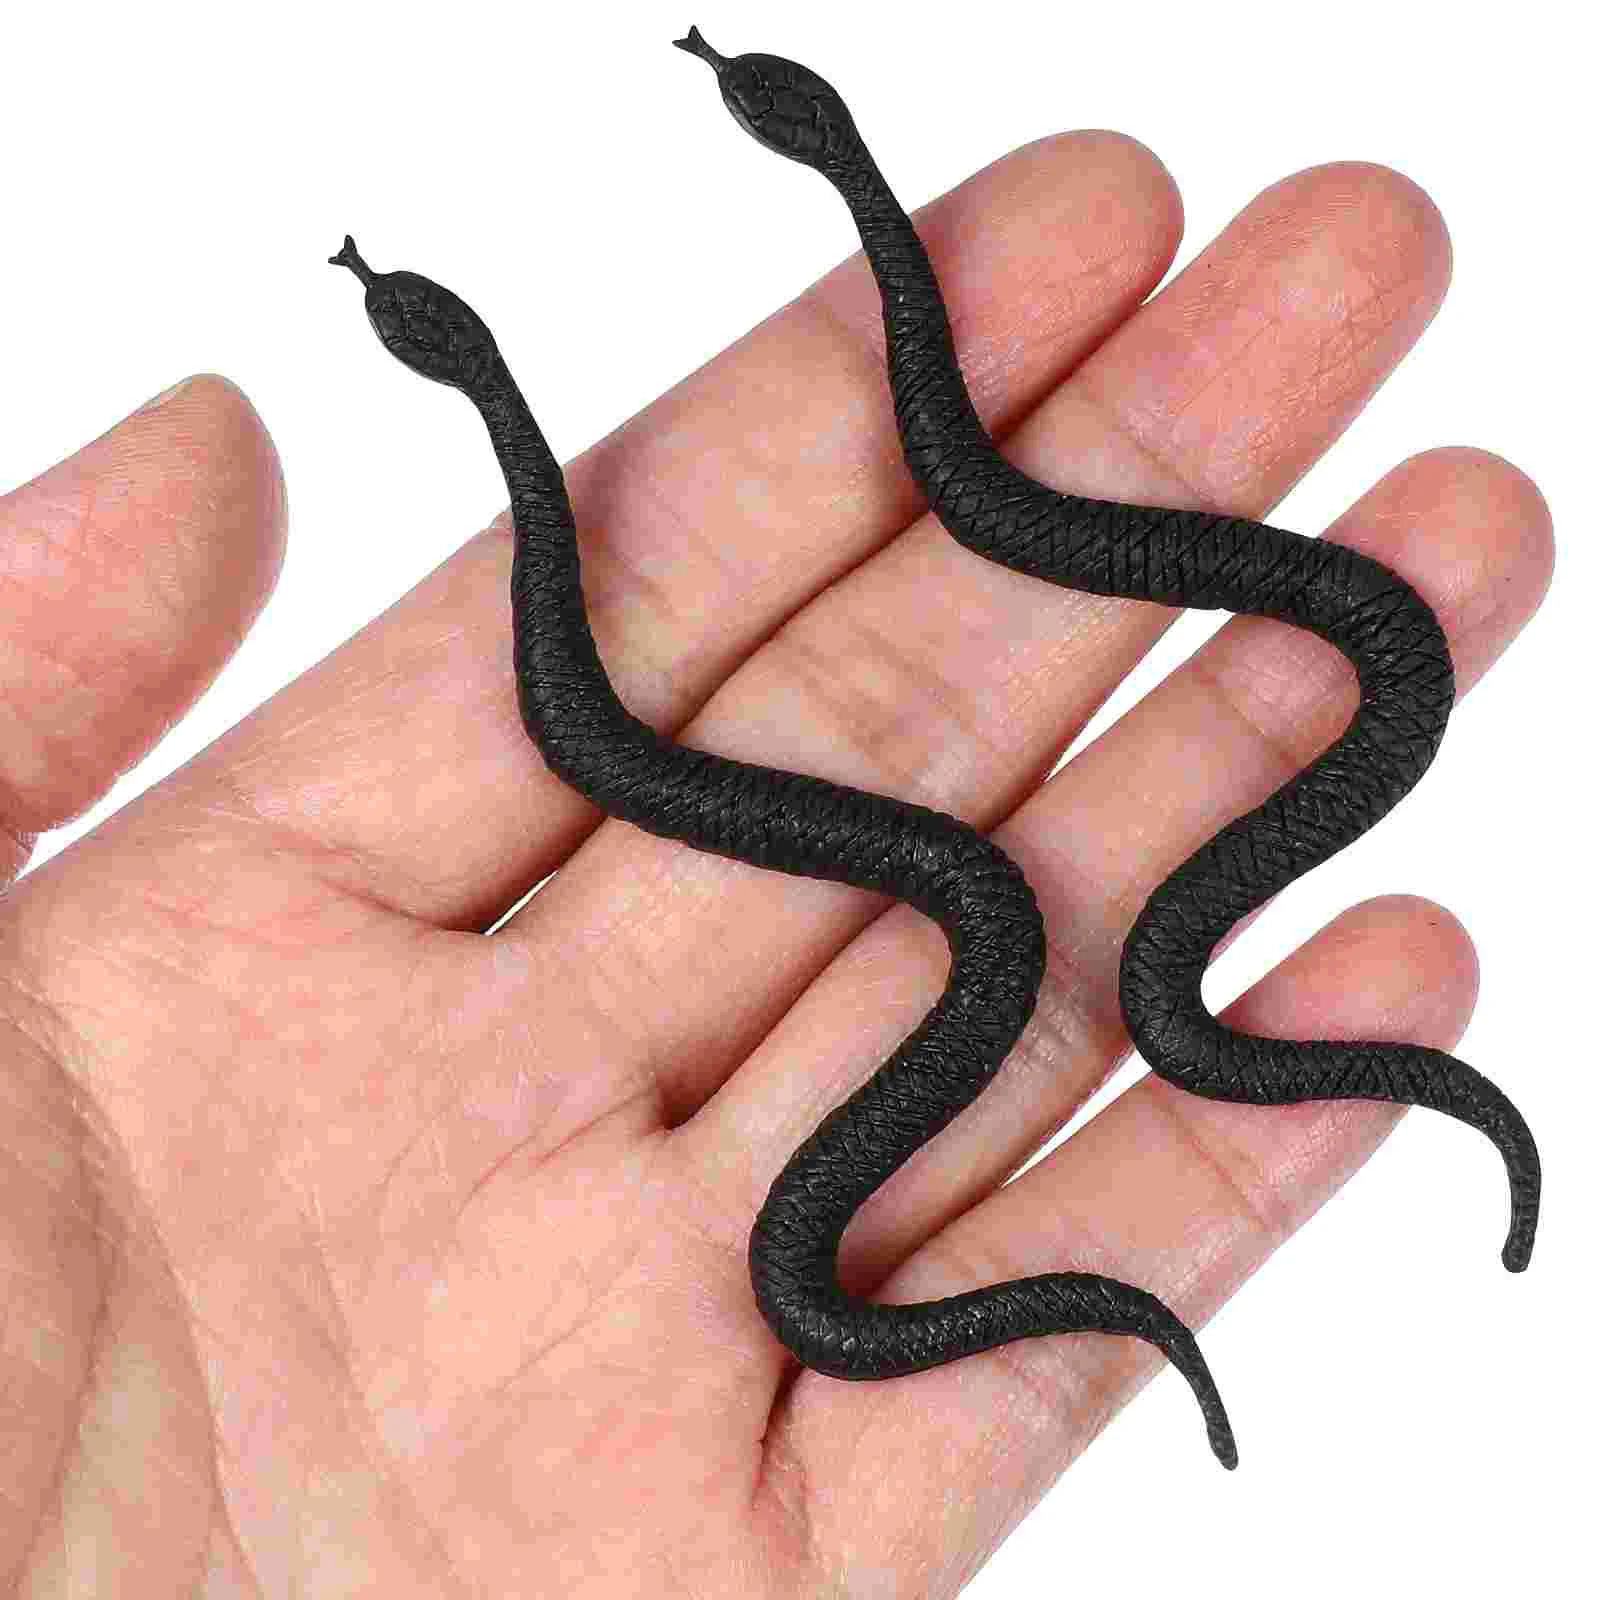 100 Pcs Simulation Snake Model Childrens Toys Faux Snakes Props Fake for Party Plastic Trick Realistic simulation snake model desktop decoration realistic figures small fake animal childrens toys